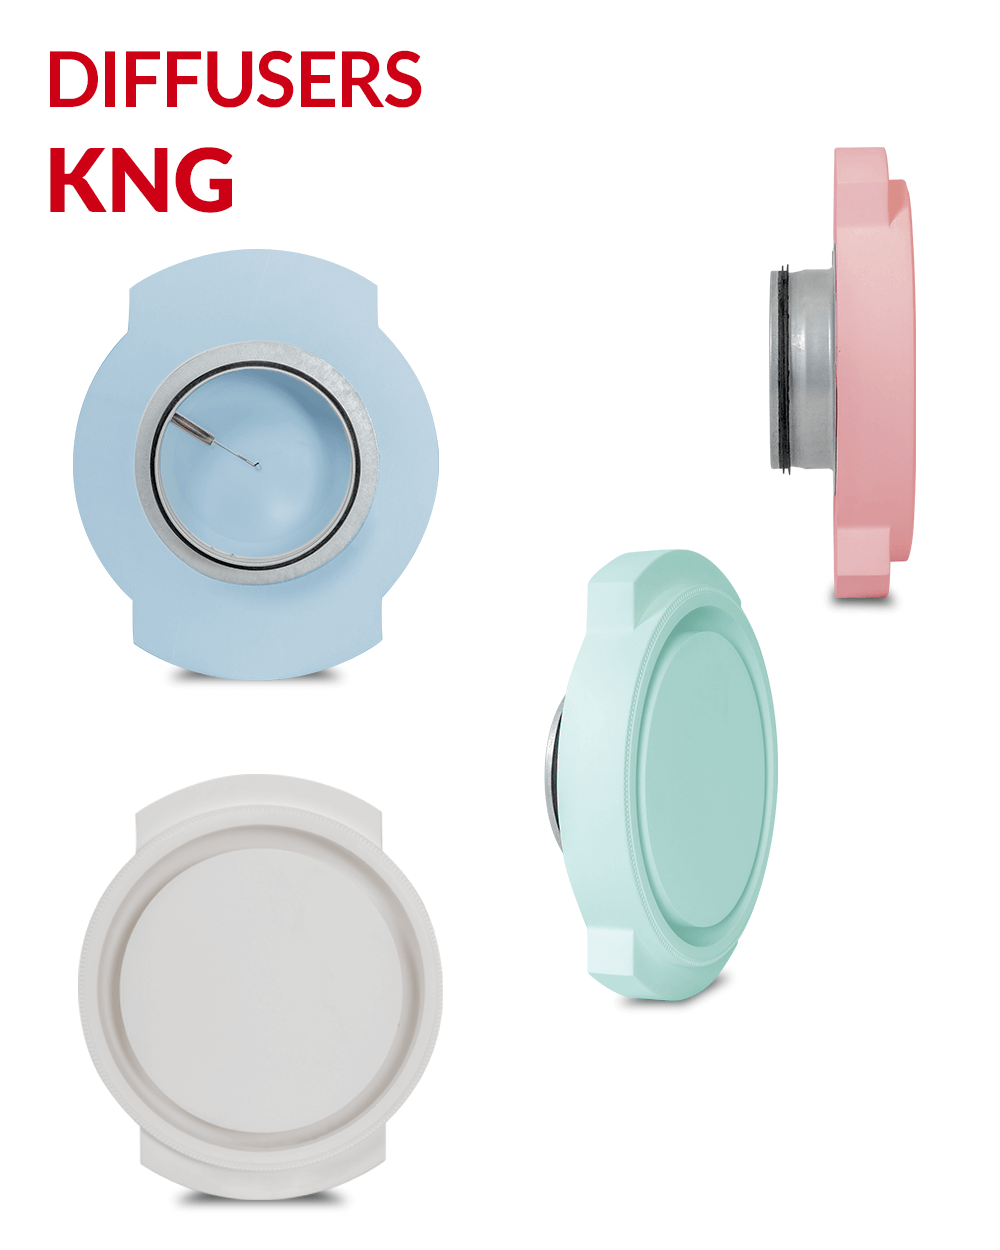 Designed for painting KNG diffusers